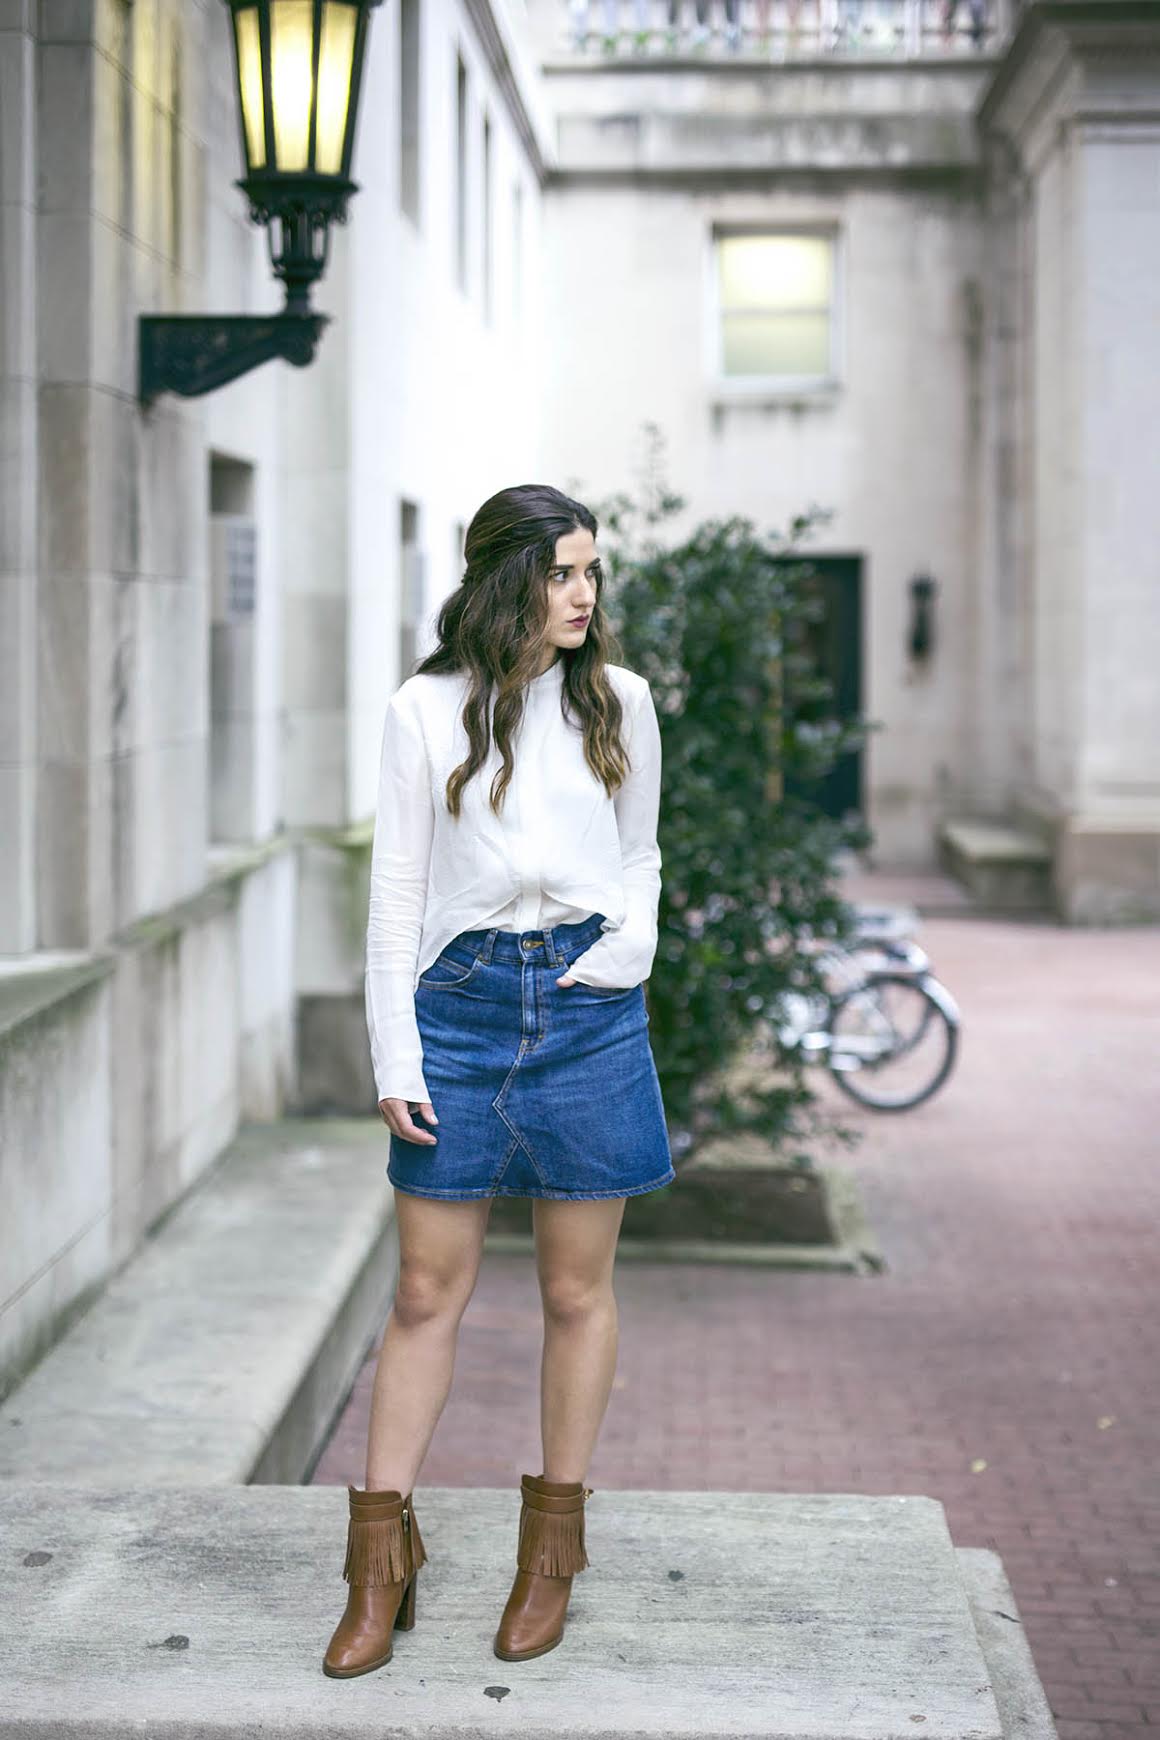 White Silk Top Chelsea and Walker Louboutins & Love Fashion Blog Esther Santer NYC Street Style Blogger Outfit OOTD Trendy Jean Denim Skirt Zara Clutch Bag Erin Dana Gold Chain Ivanka Trump Fringe Booties Inspo Cute Women Girl Transitional Pieces Fall.jpg